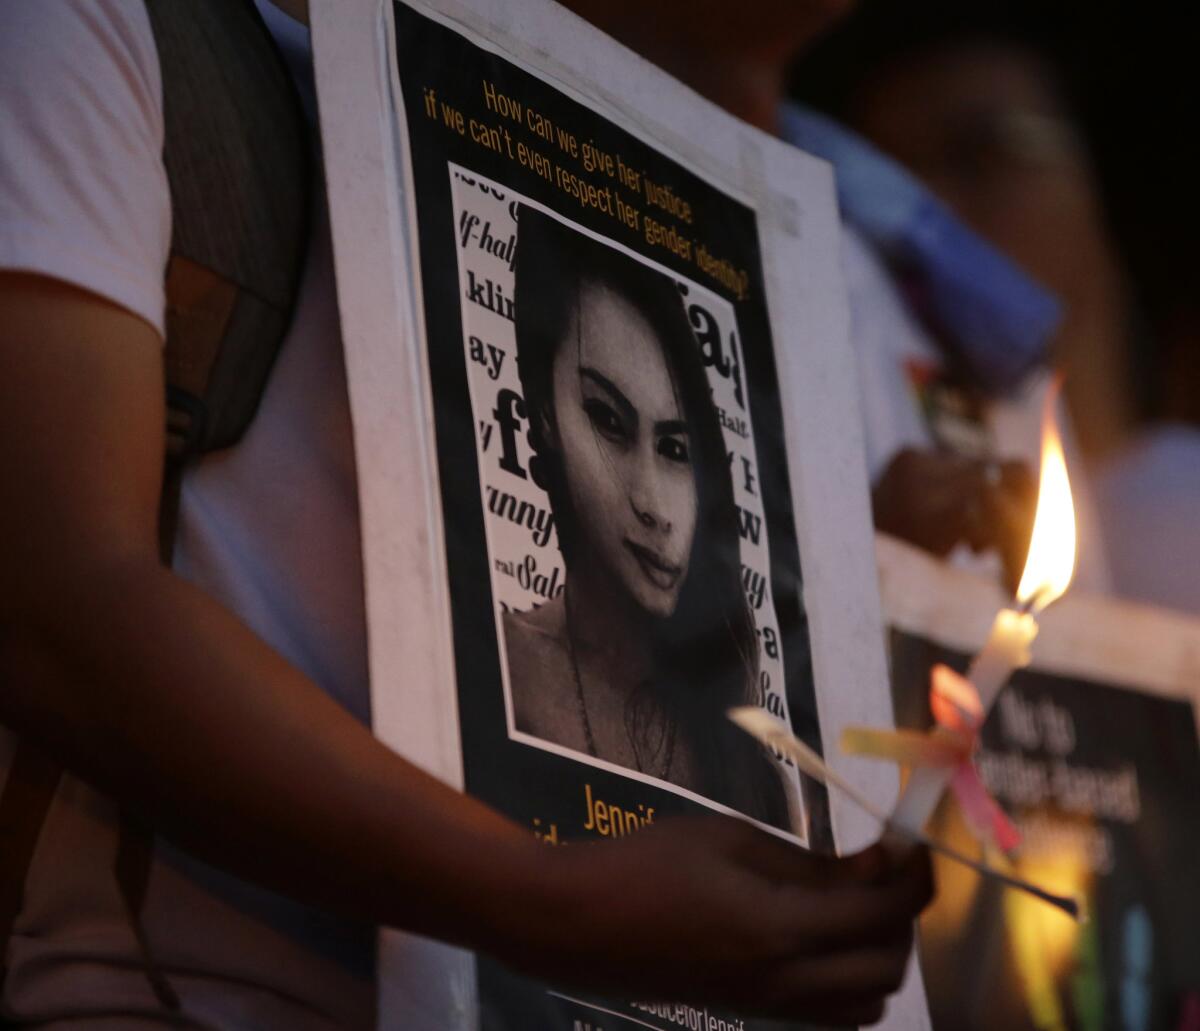 A protester holds a lighted candle in front of a portrait of slaying victim Jennifer Laude during a rally at the University of the Philippines campus in uburban Quezon City on Oct. 24.